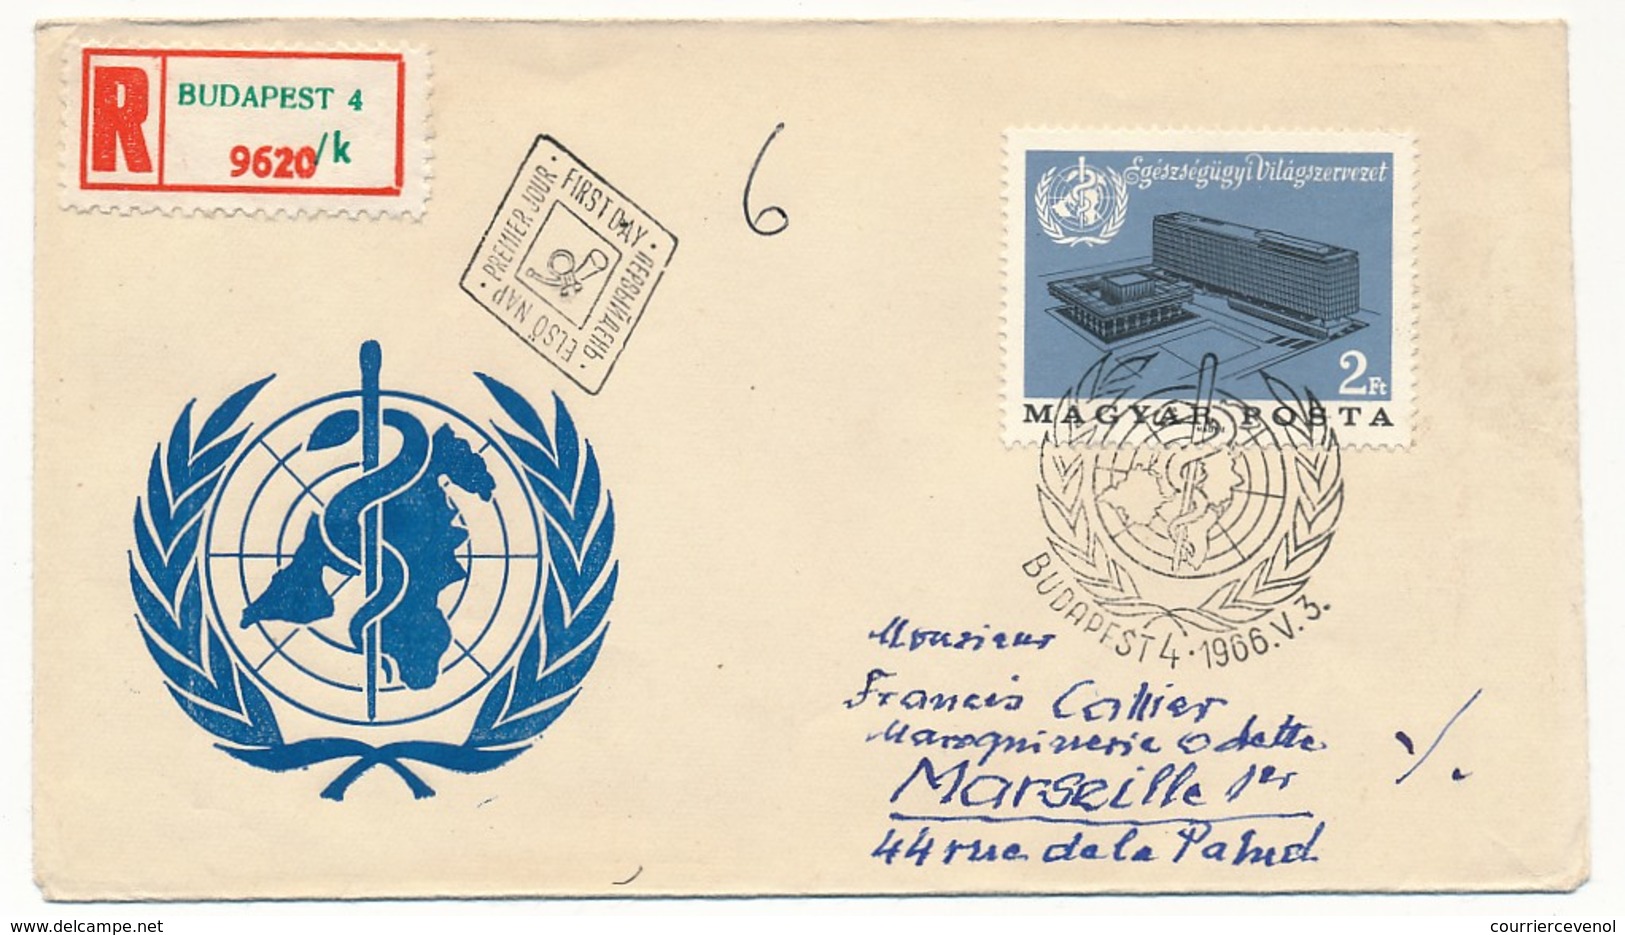 Hongrie - Enveloppe FDC - Budapest 1966 - FDC